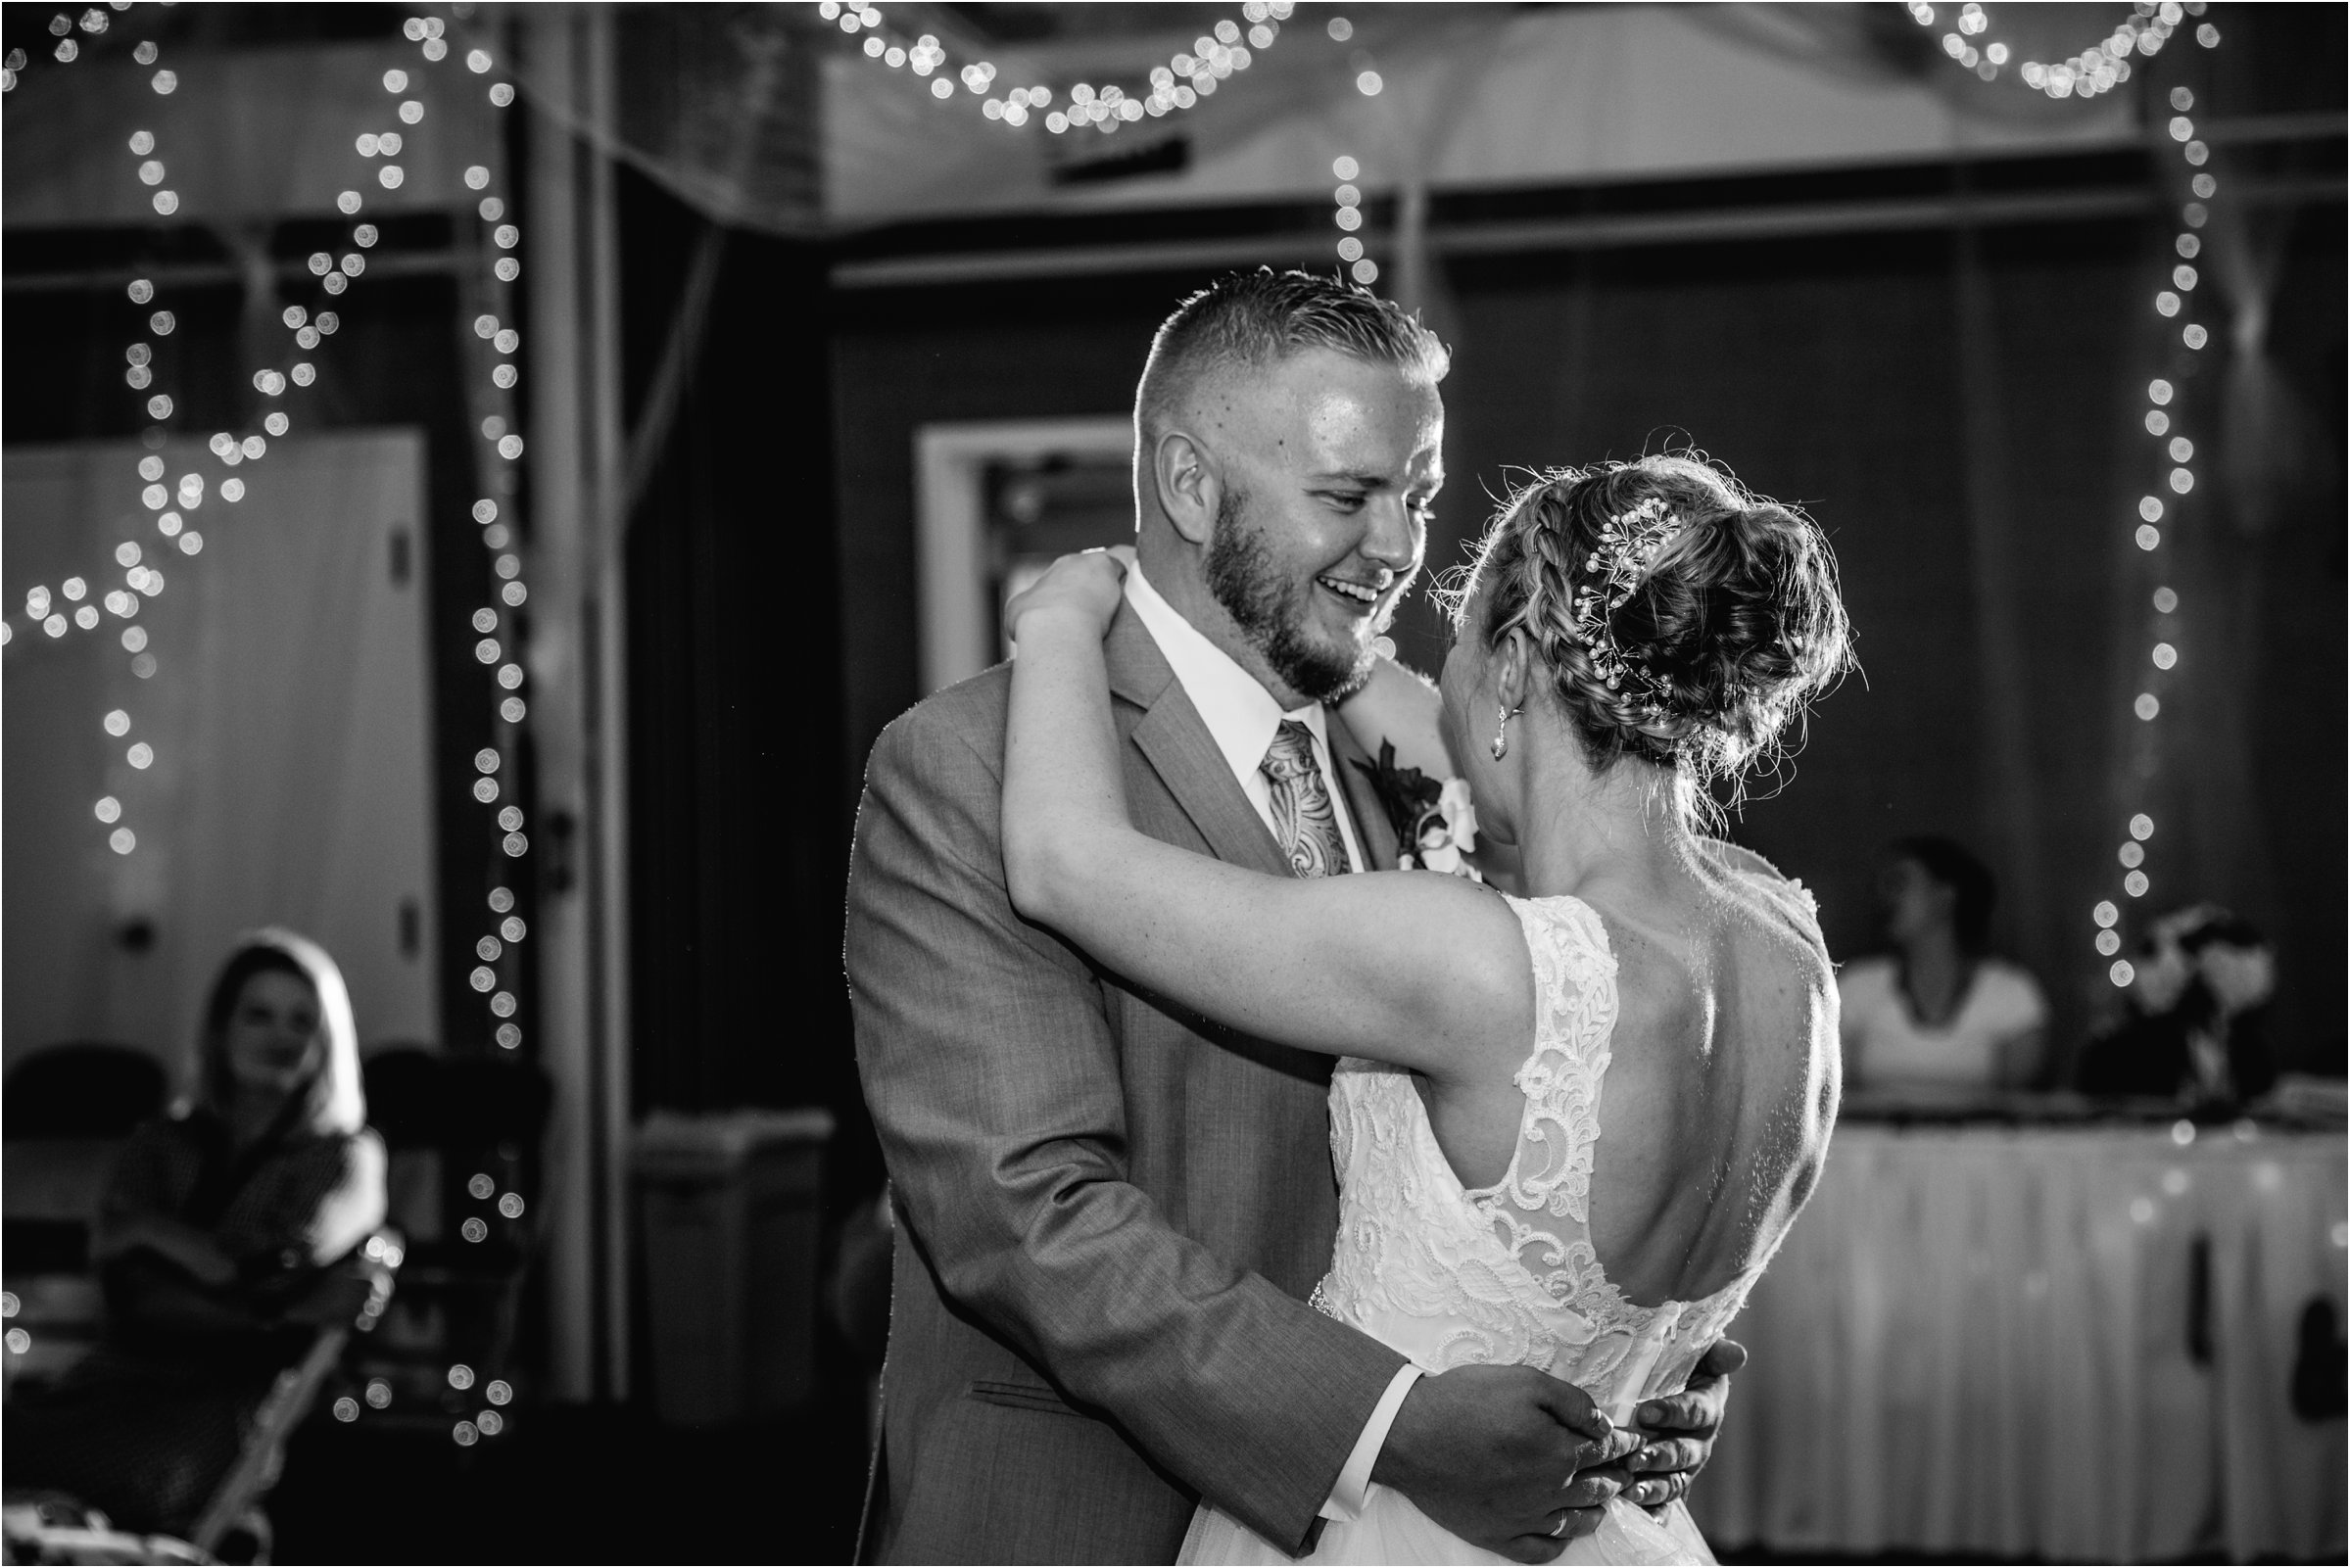 black and white photo of bride and groom dancing together at their wedding reception